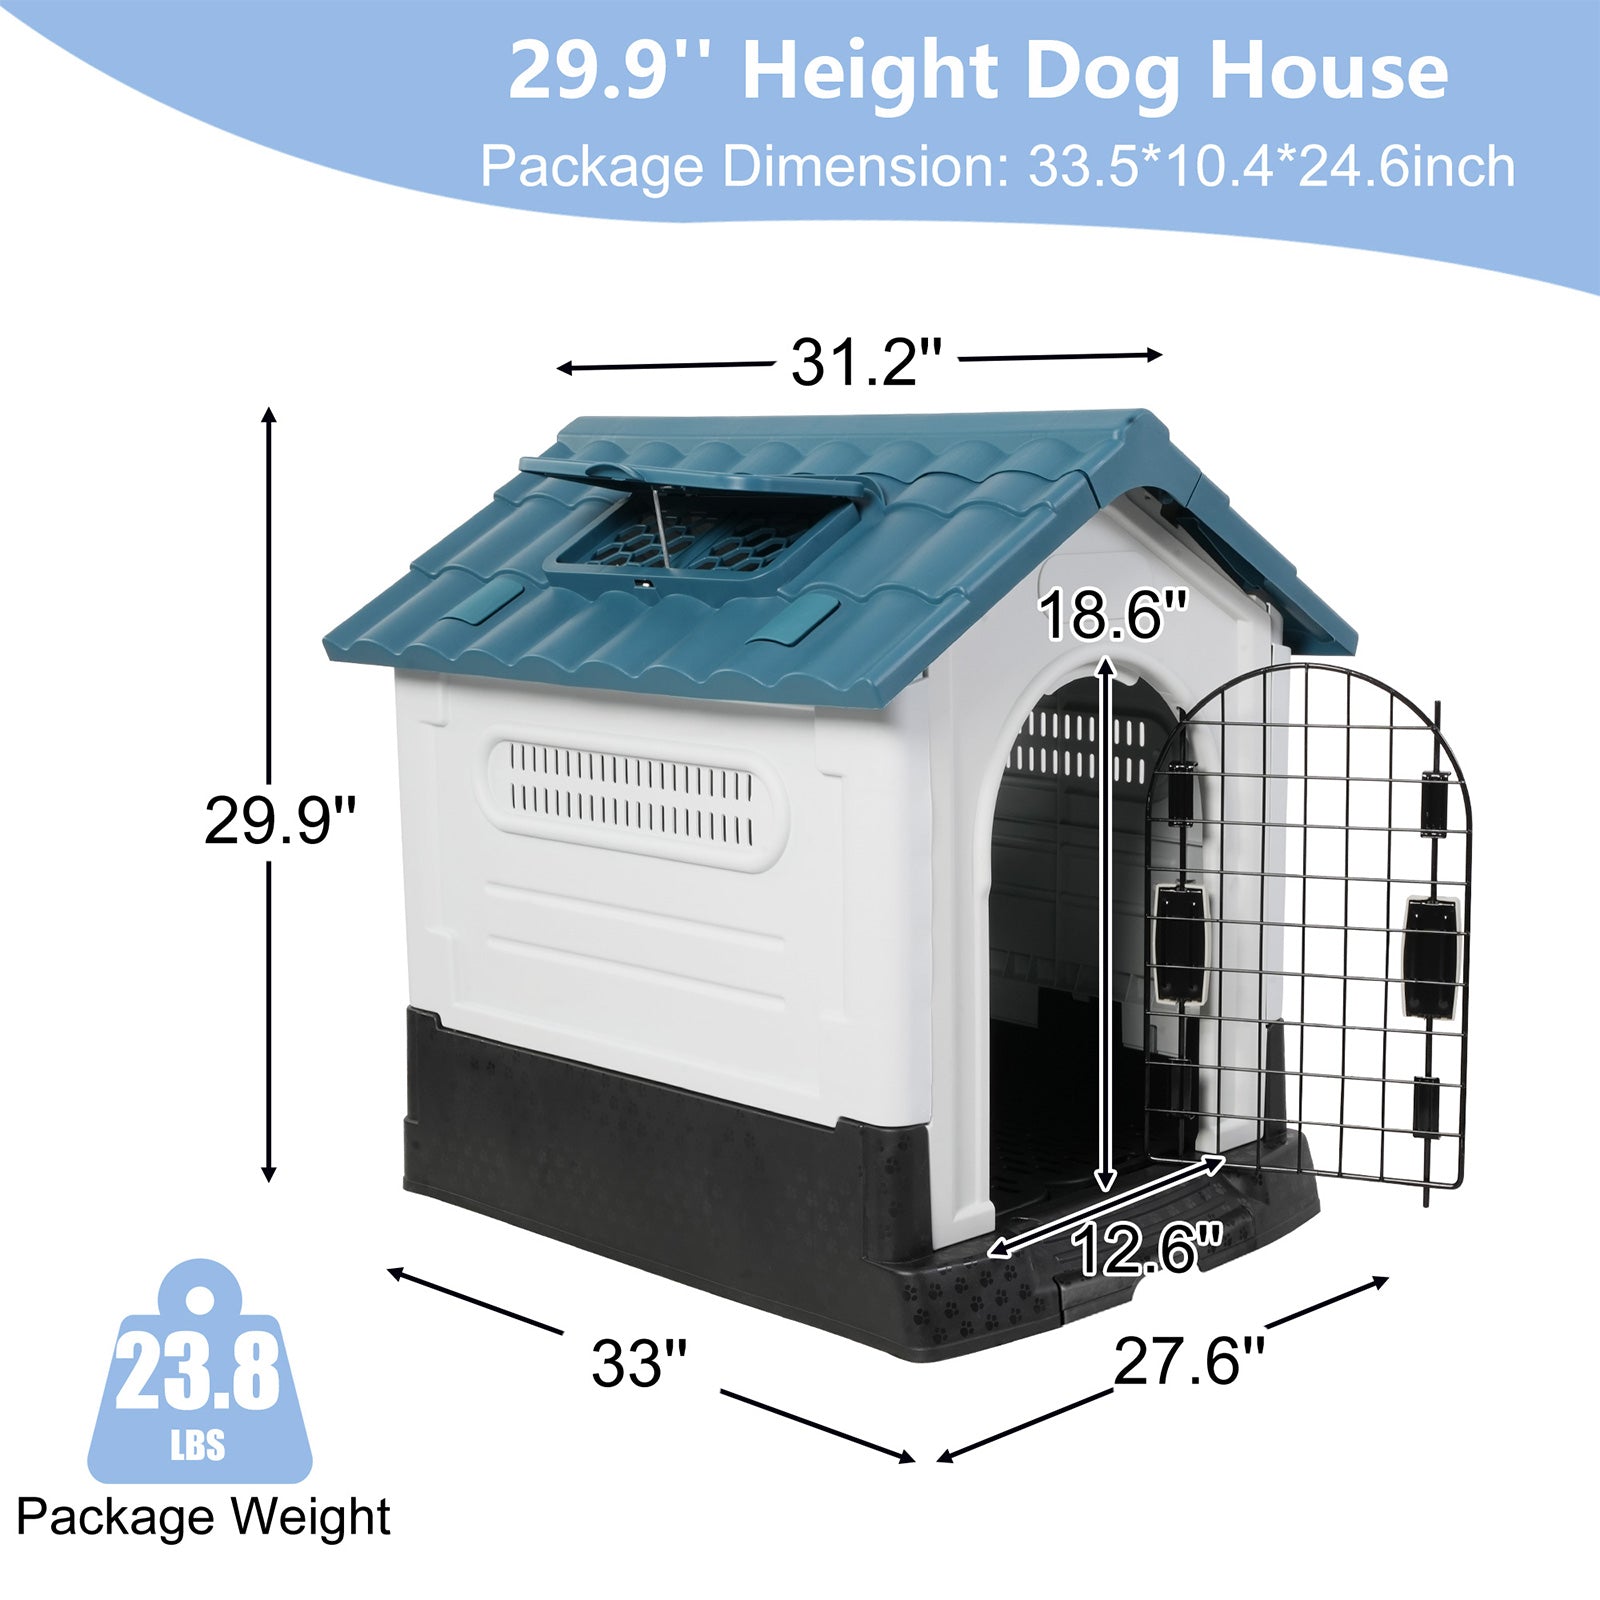 Outdoor Medium Dog House Plastic Waterproof Kennel with Air Vents, 33"L x 27.6"W x 29.9"H, Blue Roof